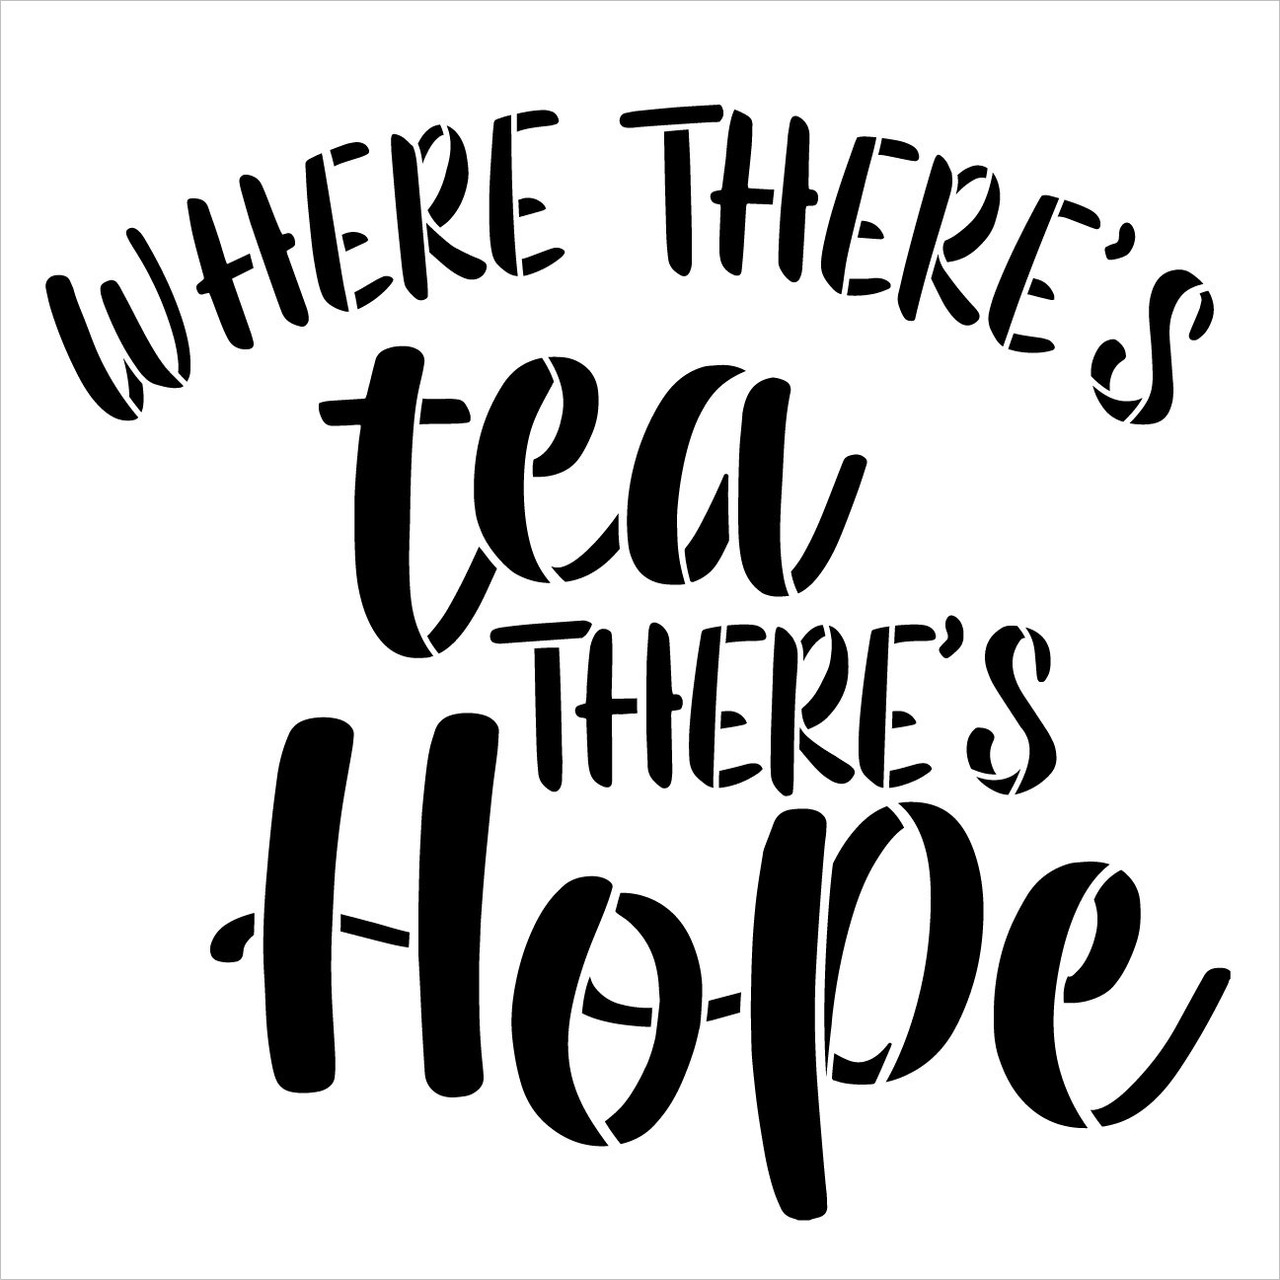 Where There's Tea There's Hope Quote Stencil by StudioR12 | Craft DIY Kitchen, Coffee Bar, and Station Decor | Paint Theme Wood Sign | Select Size